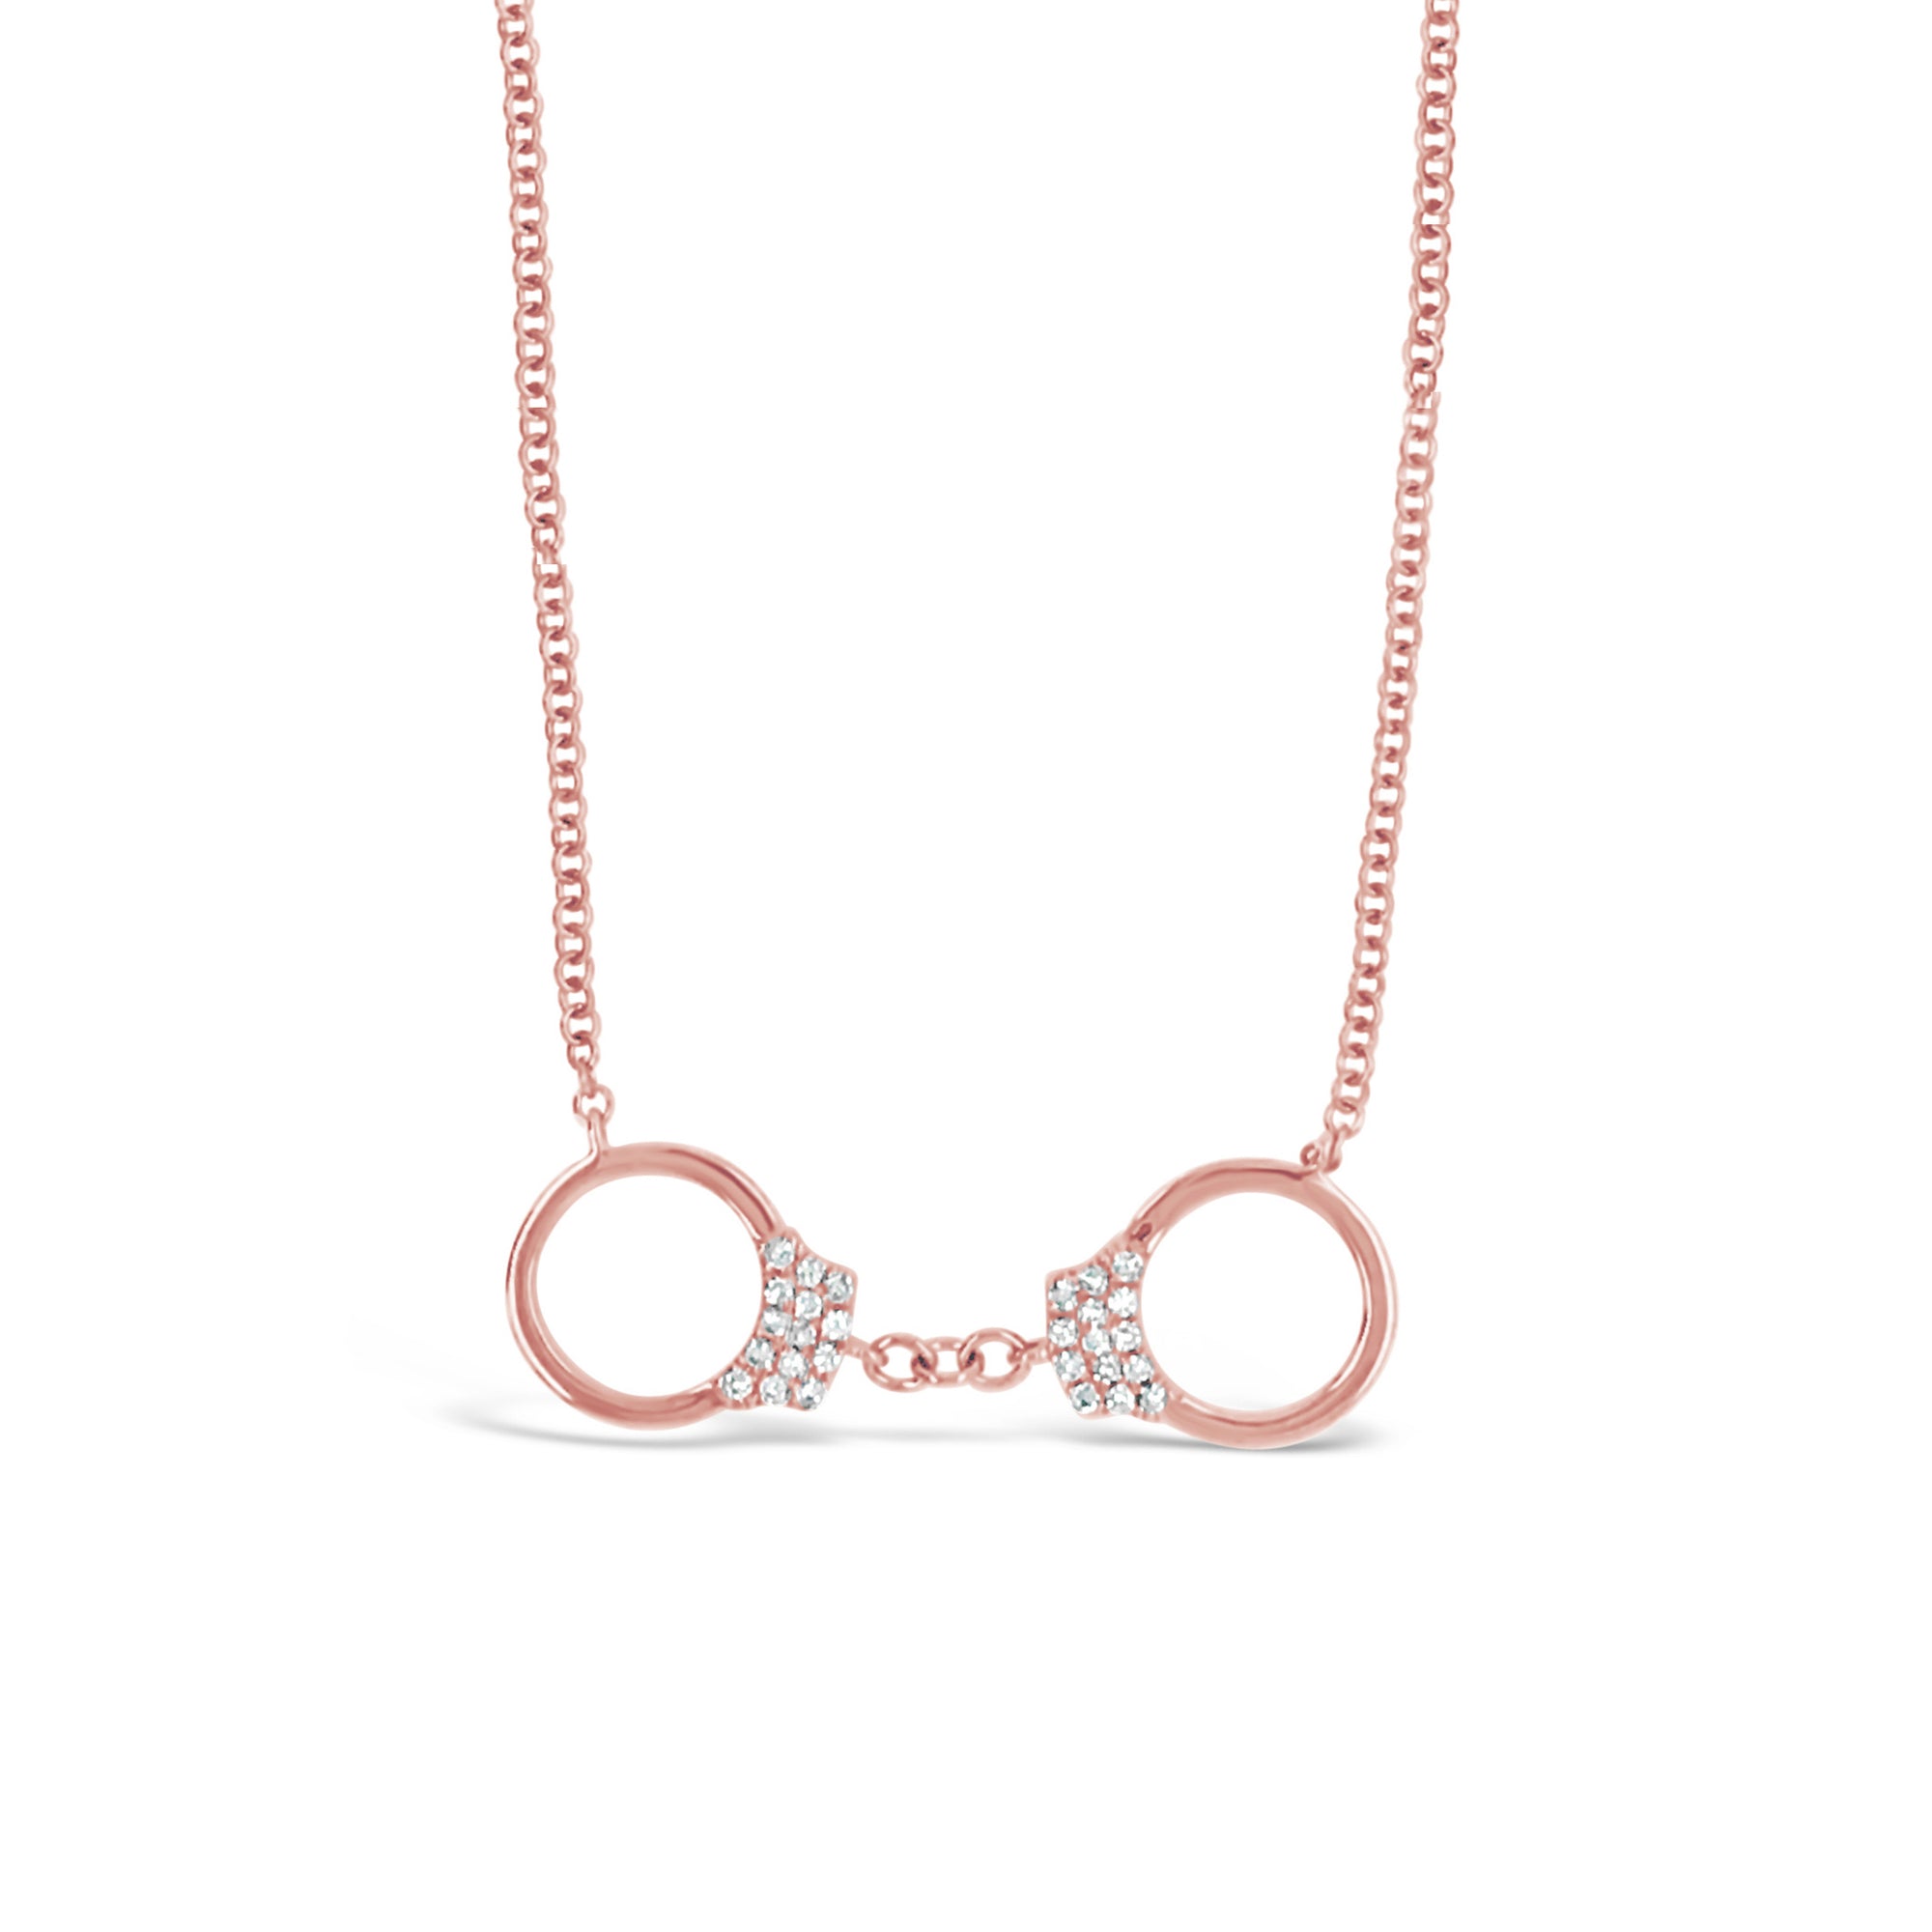 Diamond Handcuffs Necklace  -14K gold weighing 1.97 grams  -28 round diamonds totaling .07 carats